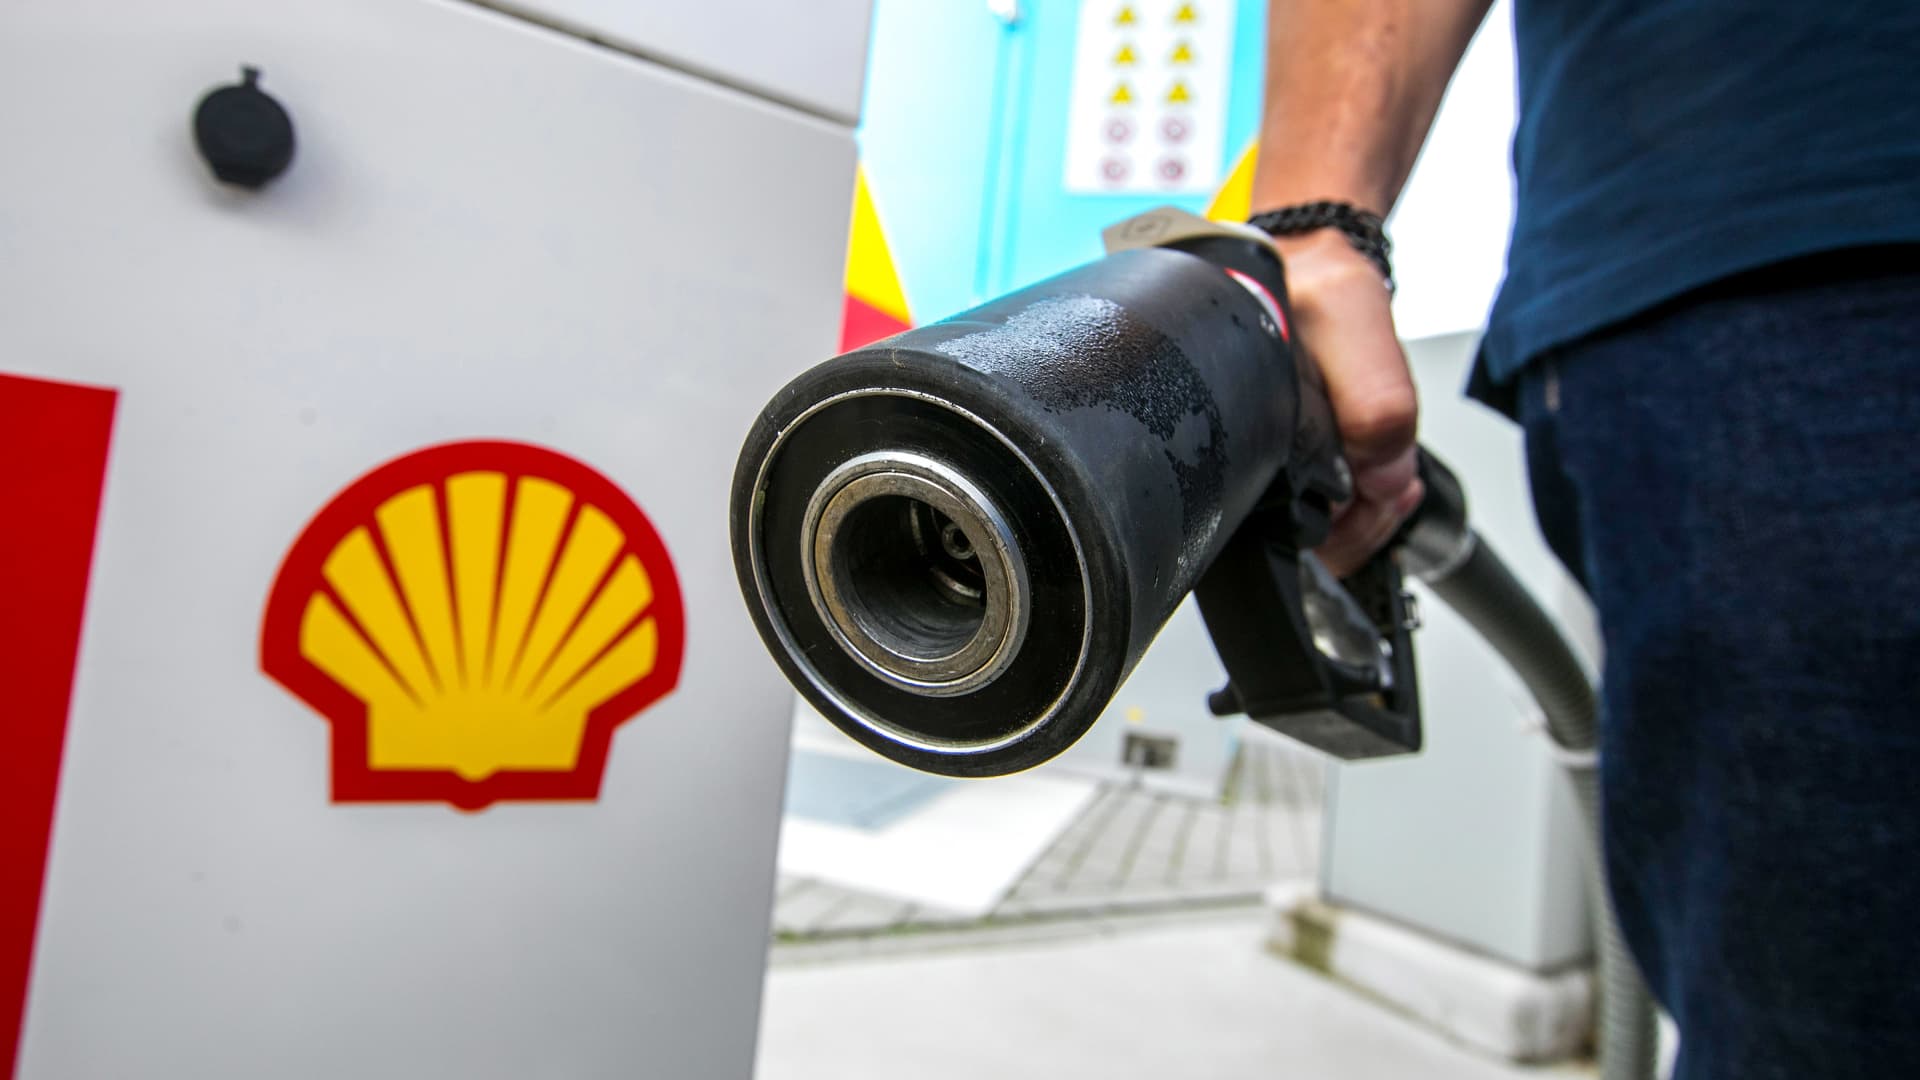 Shell will cut 200 jobs in clean energy division